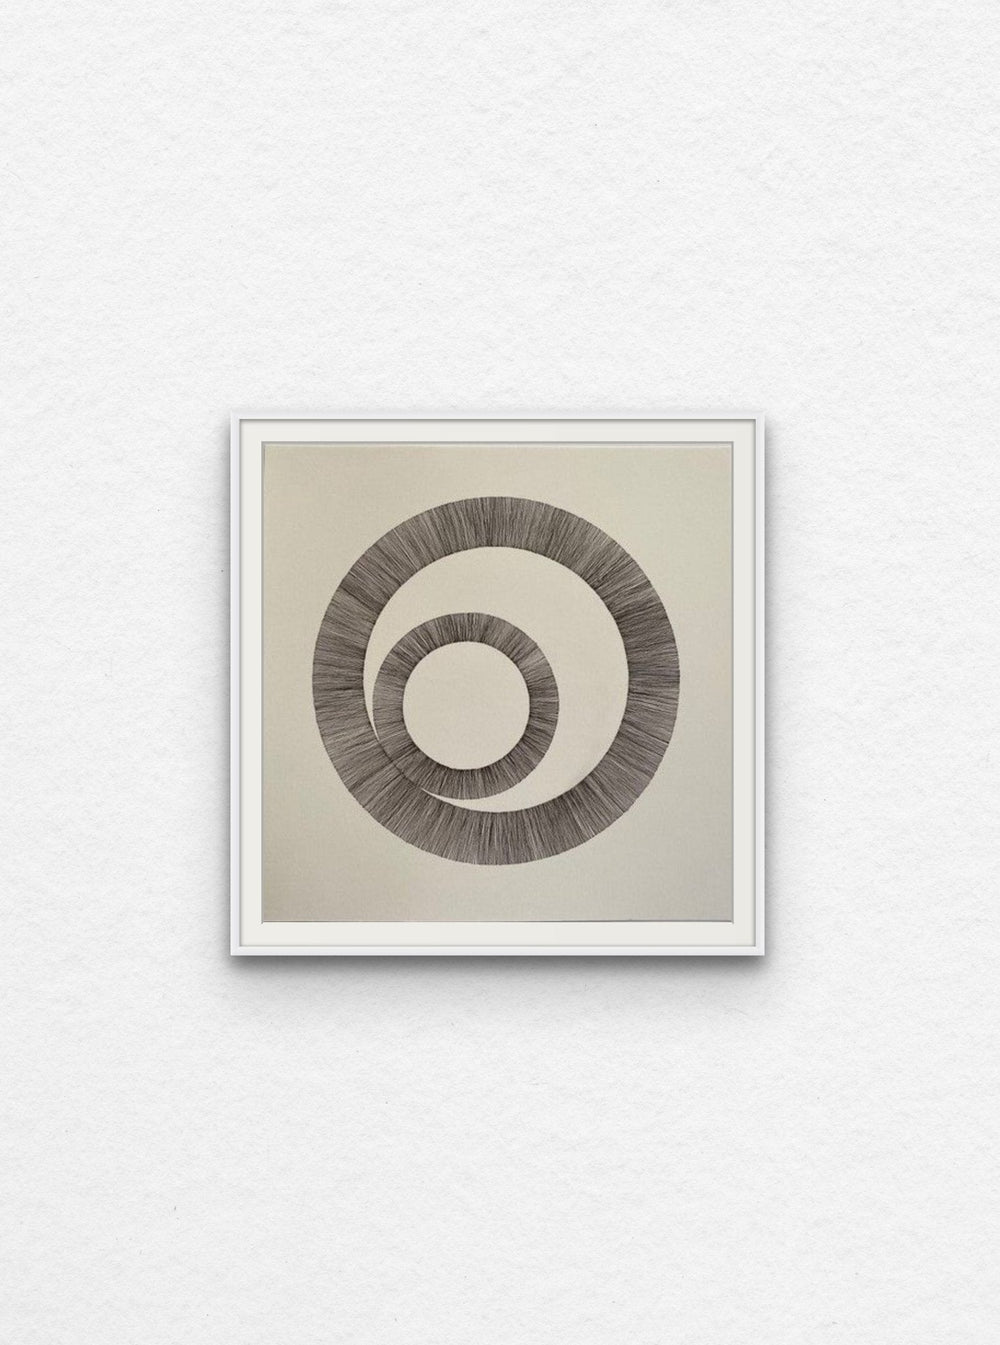 Ink drawing using lines to create two interlinked circles floated in white frame,